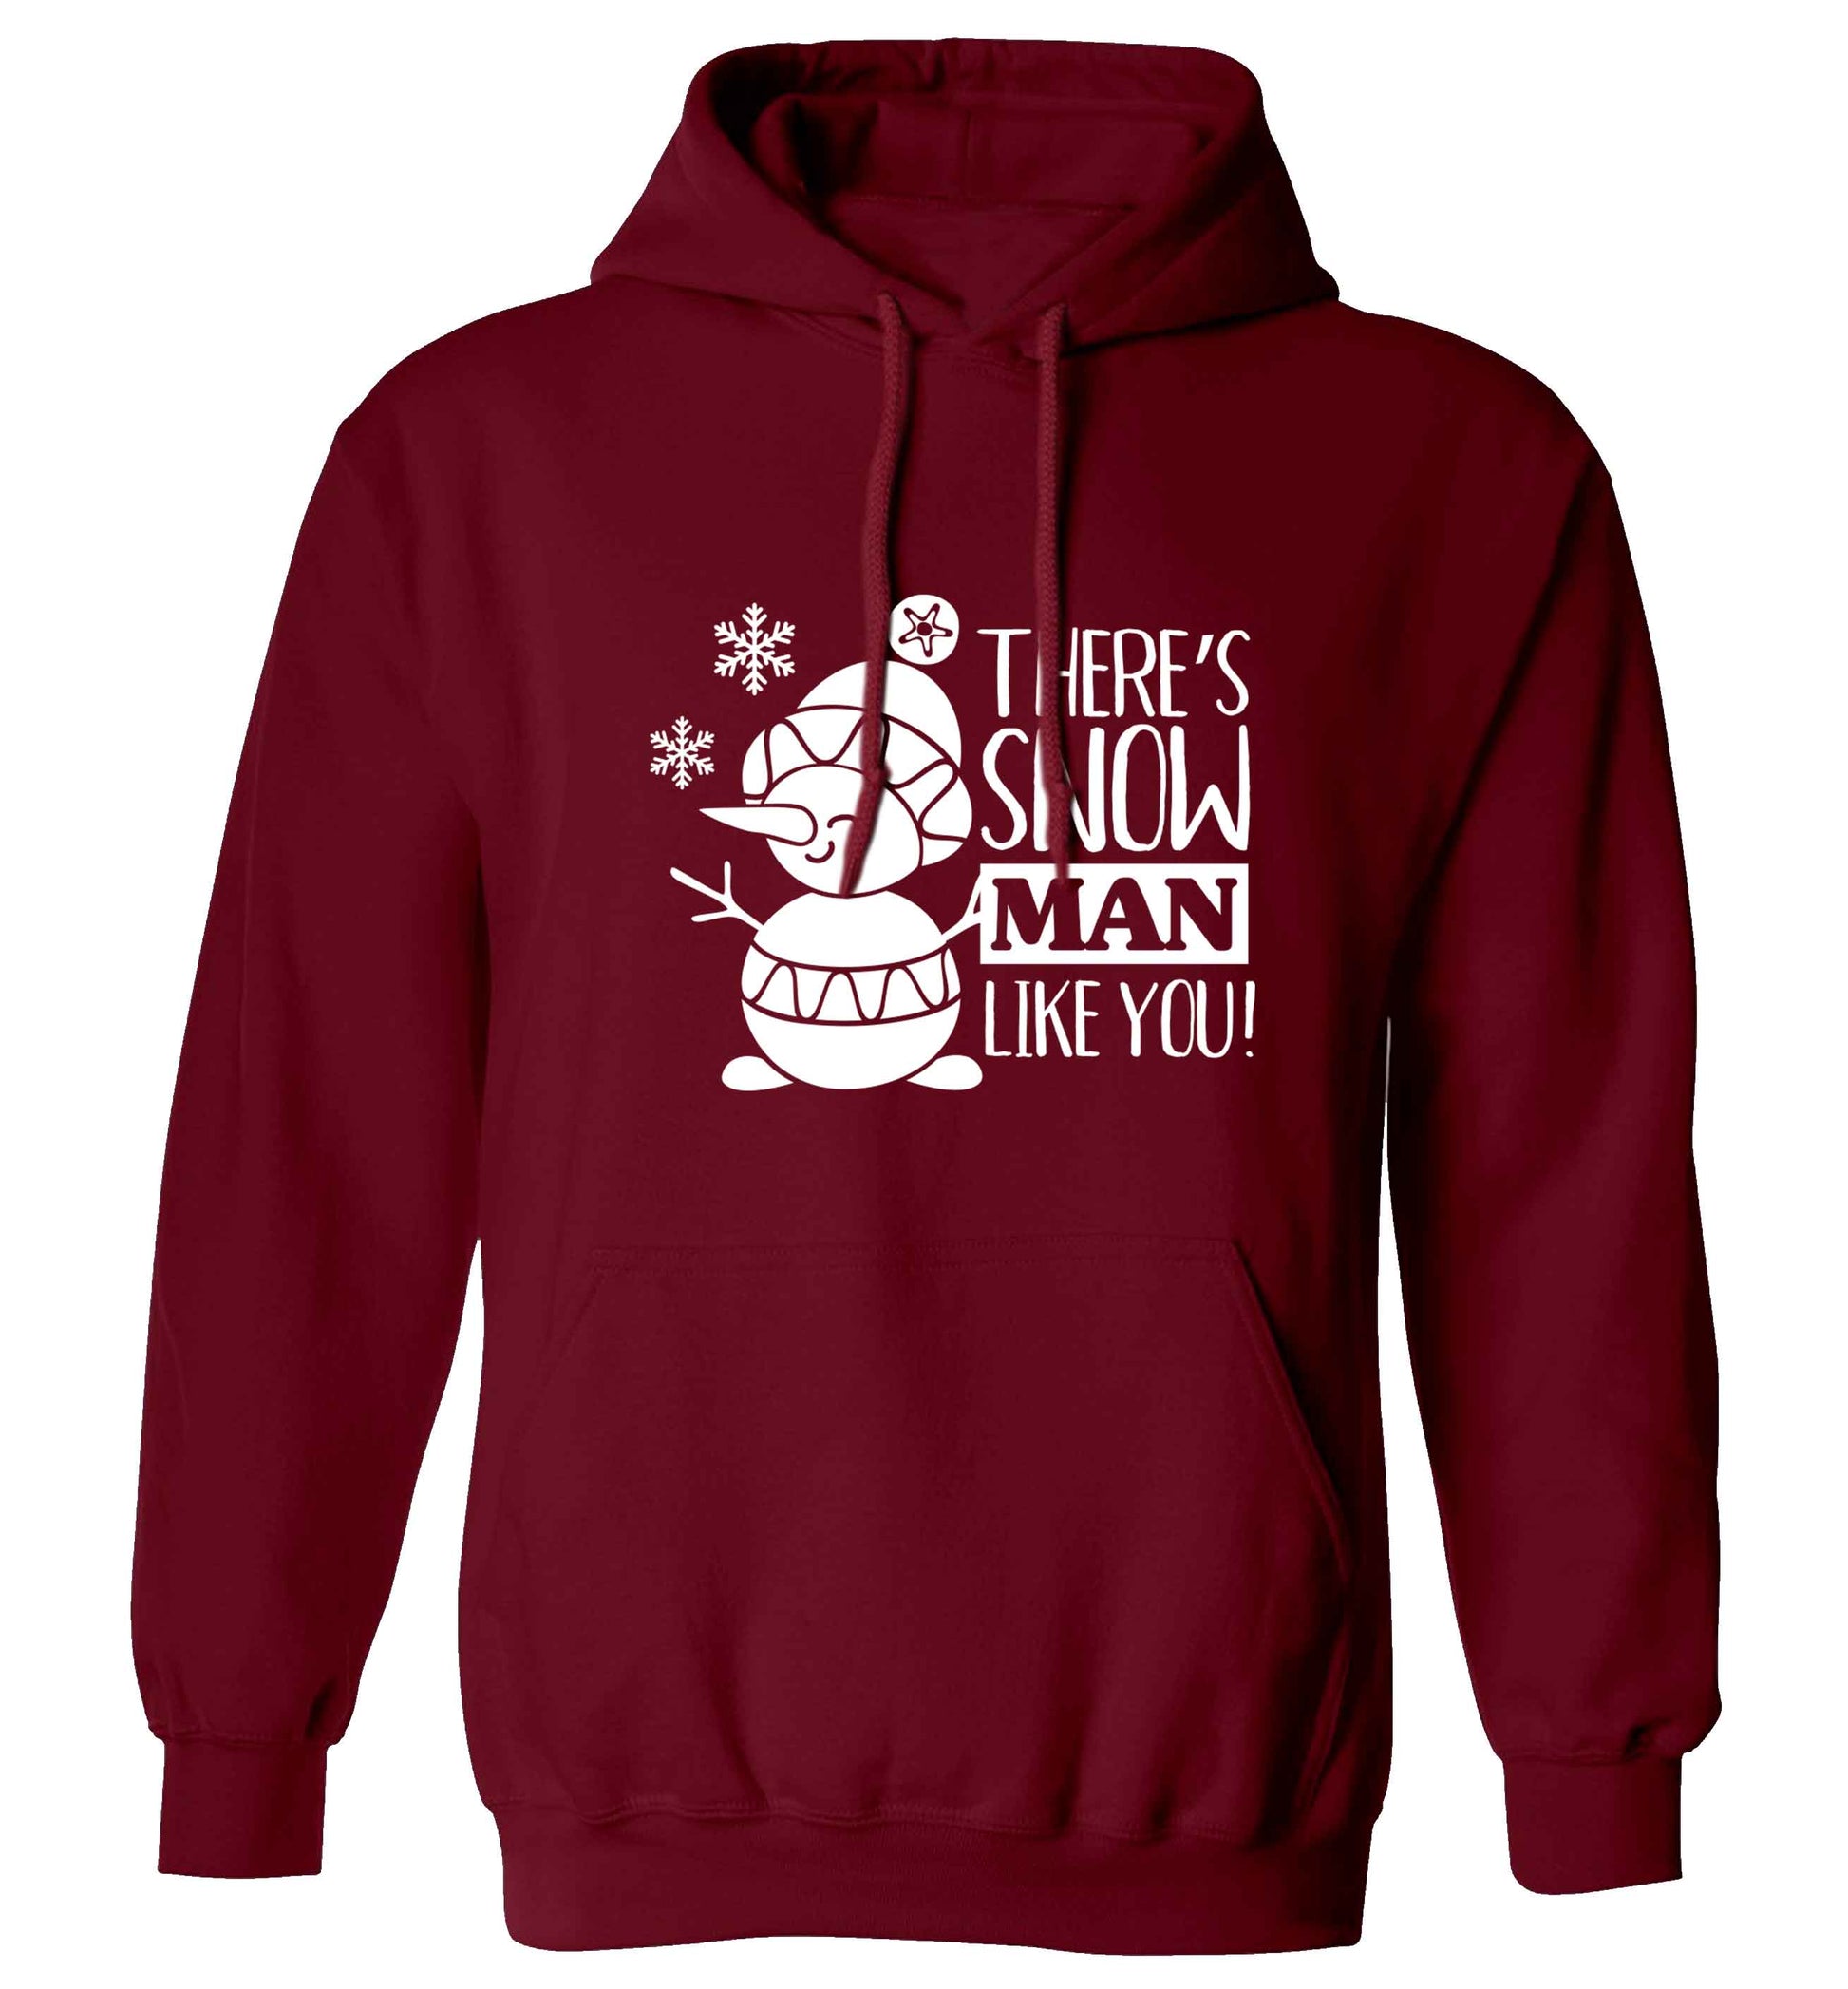 There's snow man like you adults unisex maroon hoodie 2XL